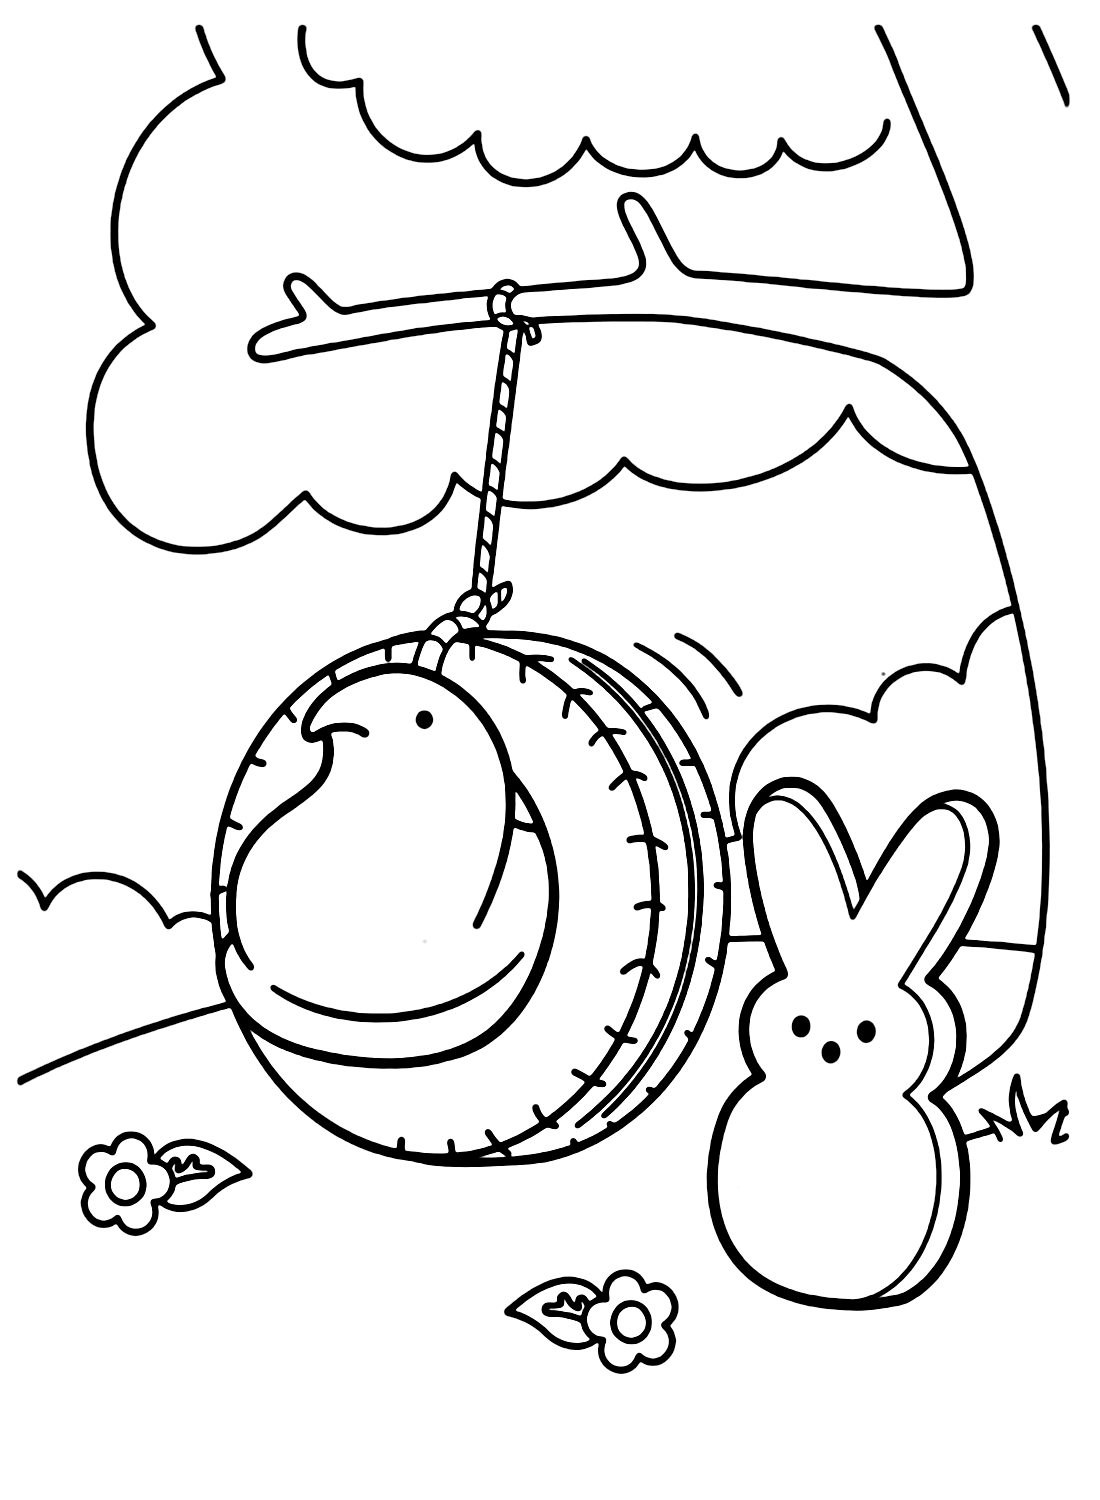 Peeps for Kids Coloring Page